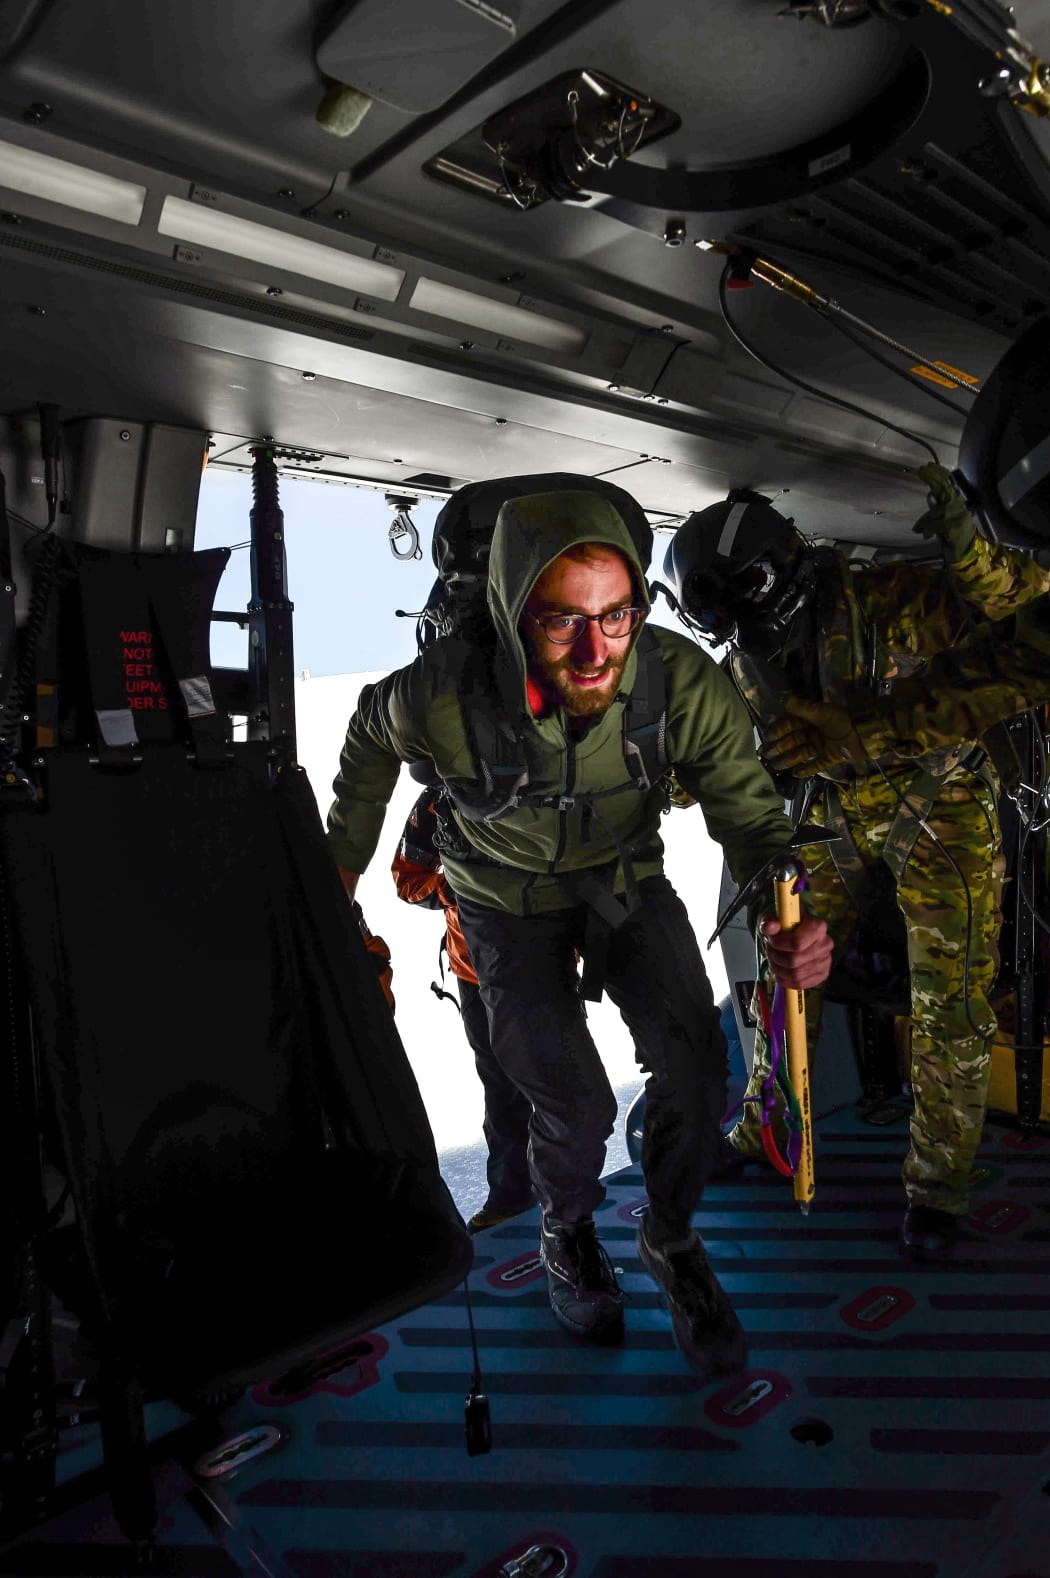 The tramper is helped on board the Air Force NH90 helicopter.